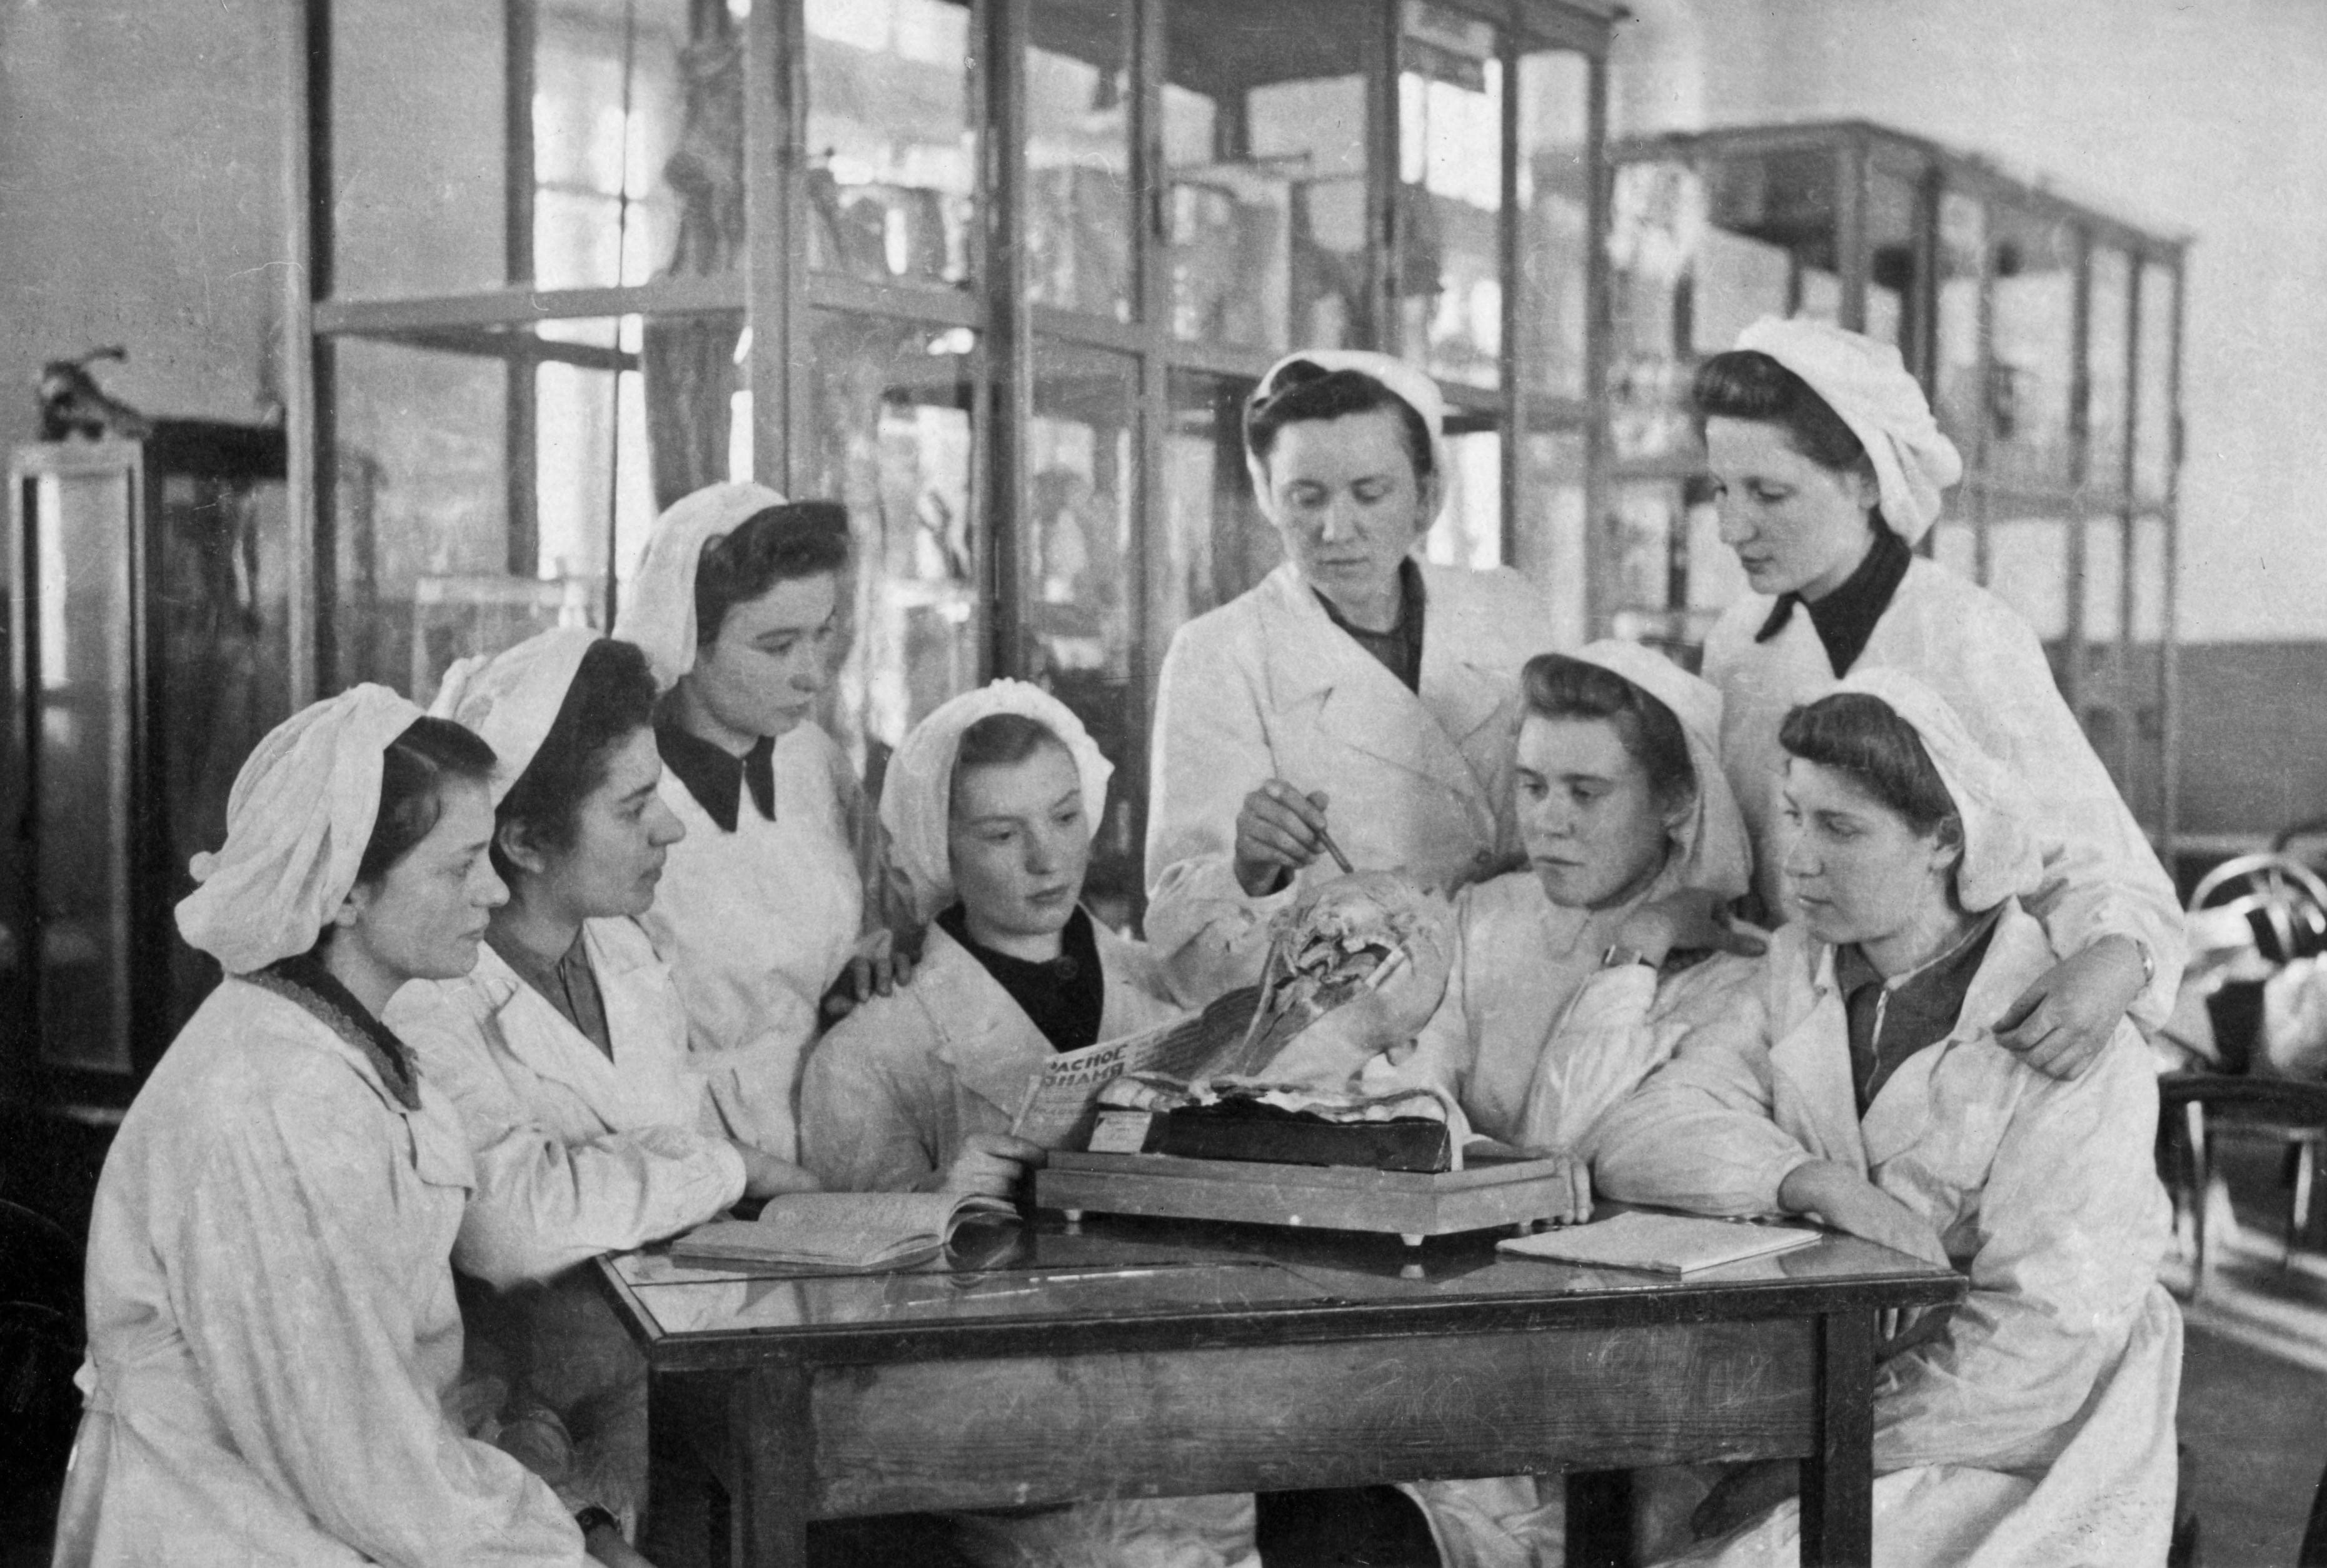 Medical students during their classes in the Anatomy museum, Tomsk (1946)